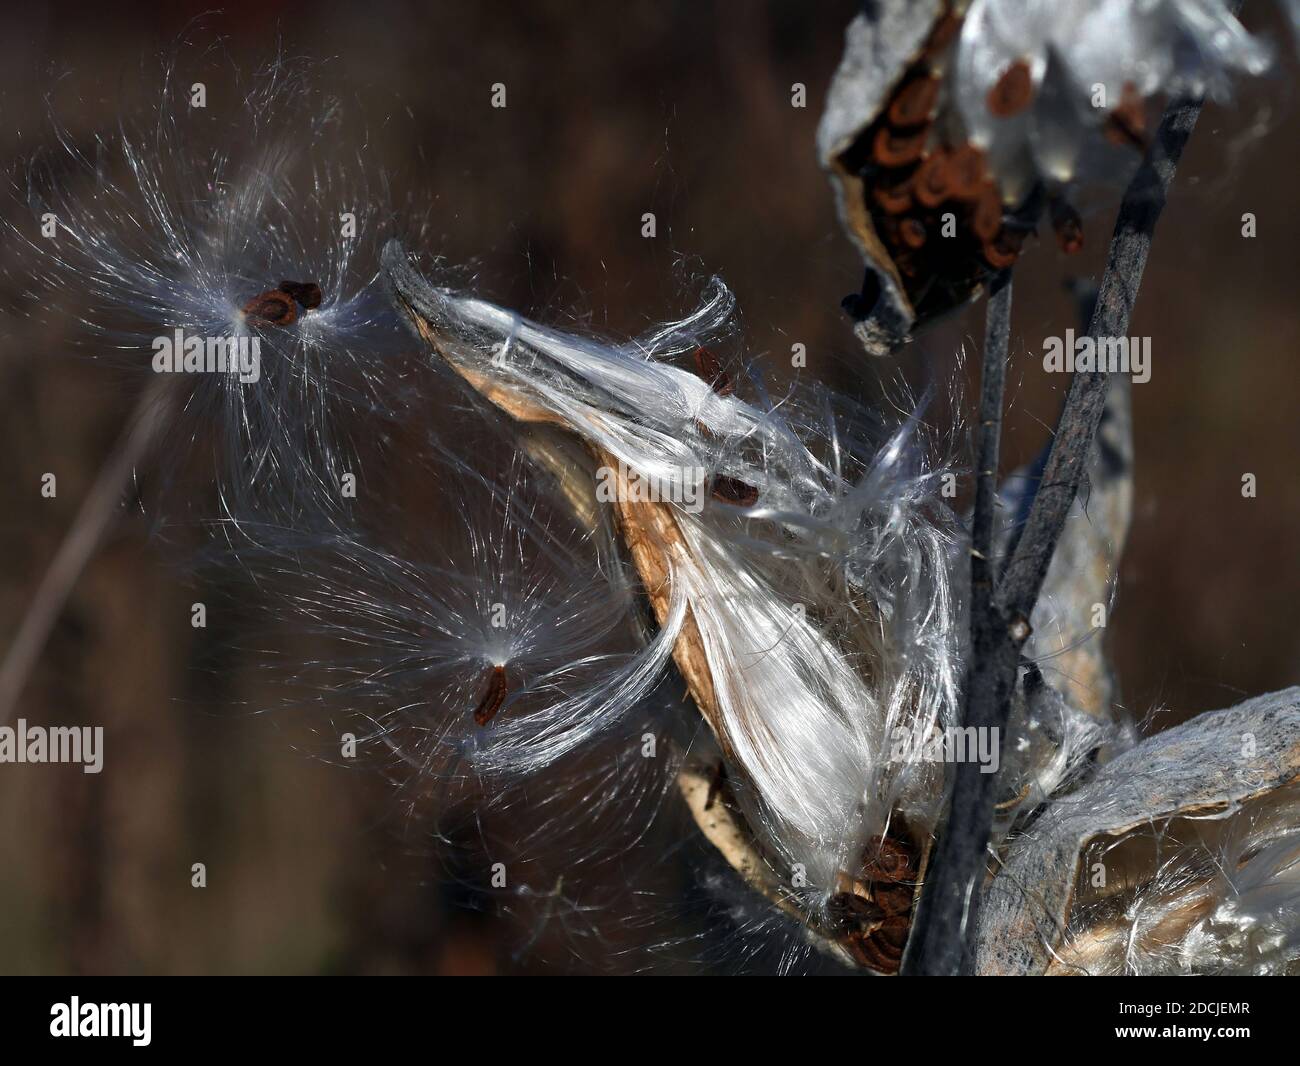 Can't get enough! Milkweed (Asclepias syriaca) seed pods opening up and spilling their seeds in autumn in Wakefield, Quebec, Canada. Stock Photo